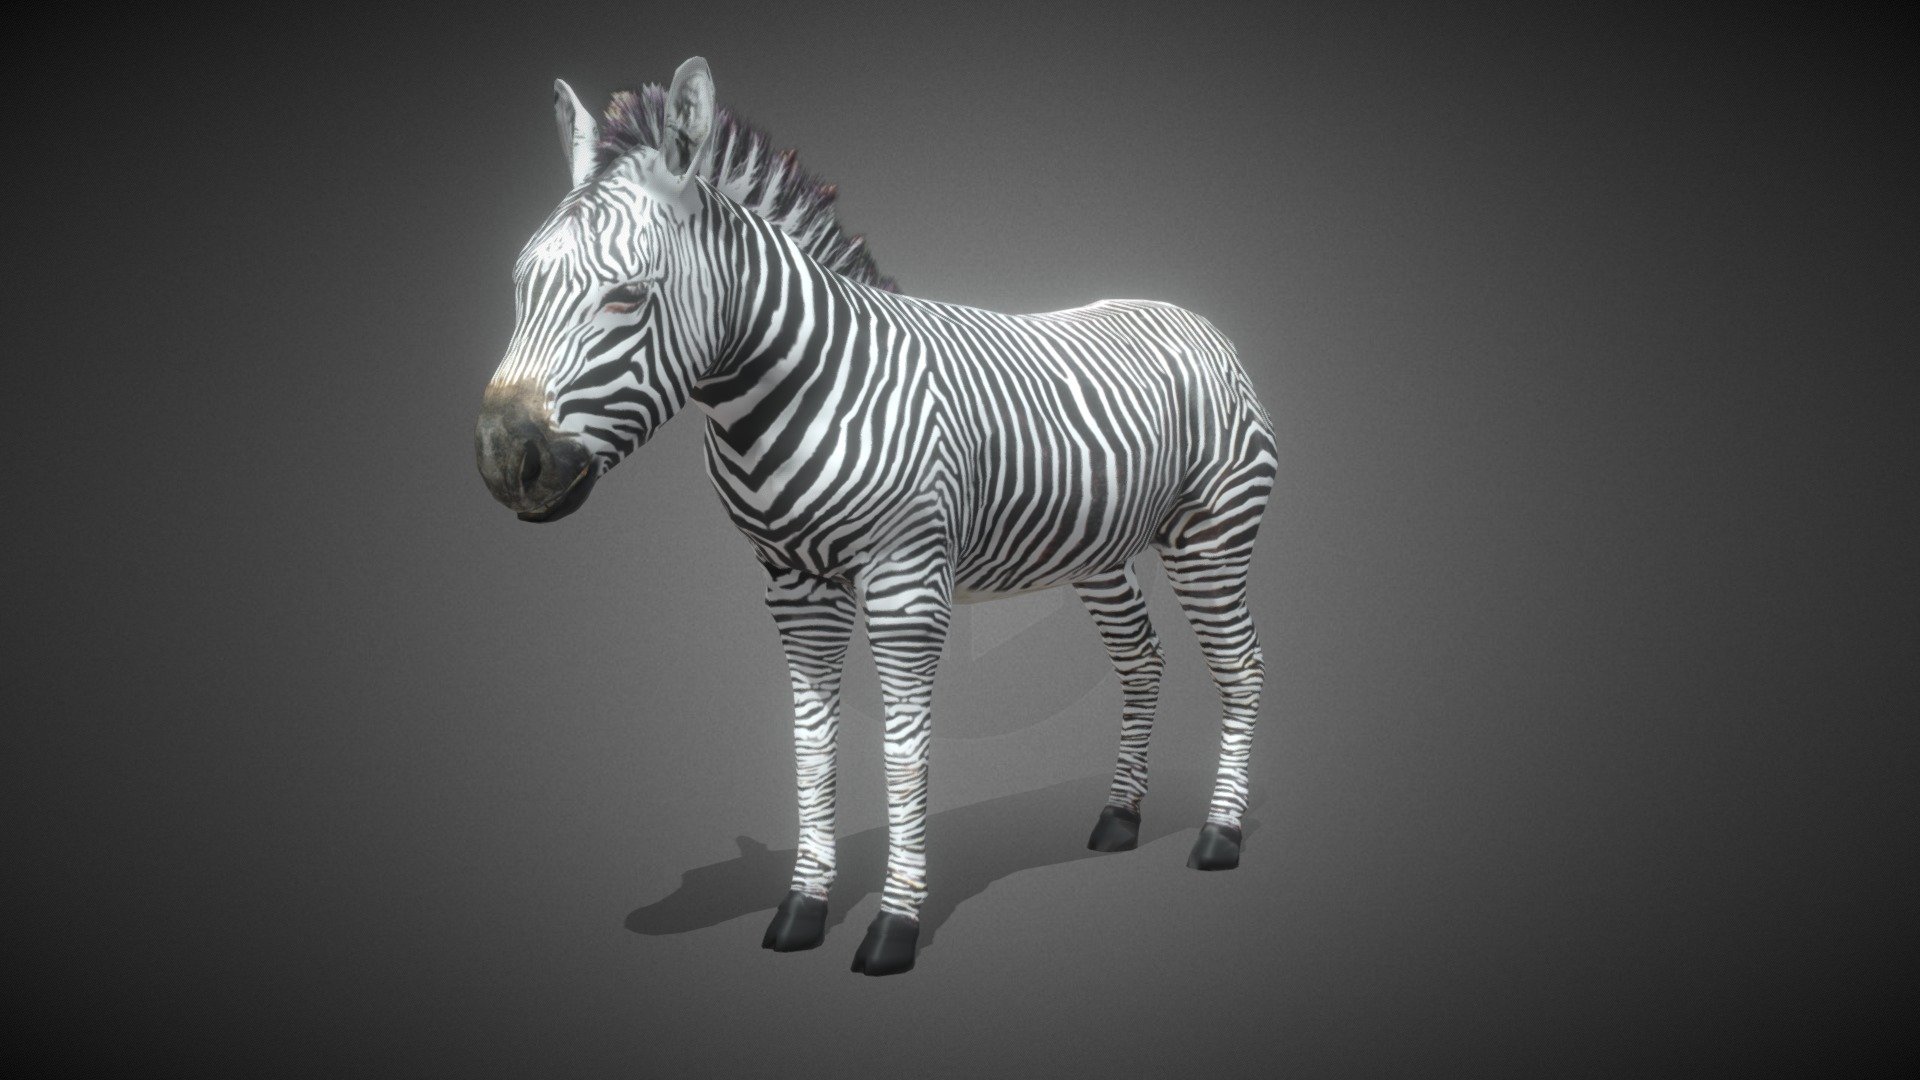 Lowpoly Zebra 3D Model:




Lowpoly (Tris: 4882 - Verts: 2483)

Game ready with Unity Package, optimized for VR/AR apps

Texture Maps includes: Basecolor, Normal

Model is created in Maya, other files supported includes: Blender, FBX, Glb/Gltf, Unity

Animations list:




0-10: default pose

11-71: idle breath

72-262: idle look around

263-293: walk

294-324: walk eating

325-385: eating

386-416: trot

417-434: gallop

435-465: get hit

466-537: death
 - Lowpoly Zebra Animated for VR AR Games - Buy Royalty Free 3D model by Dzung Dinh (@hugechimera) 3d model